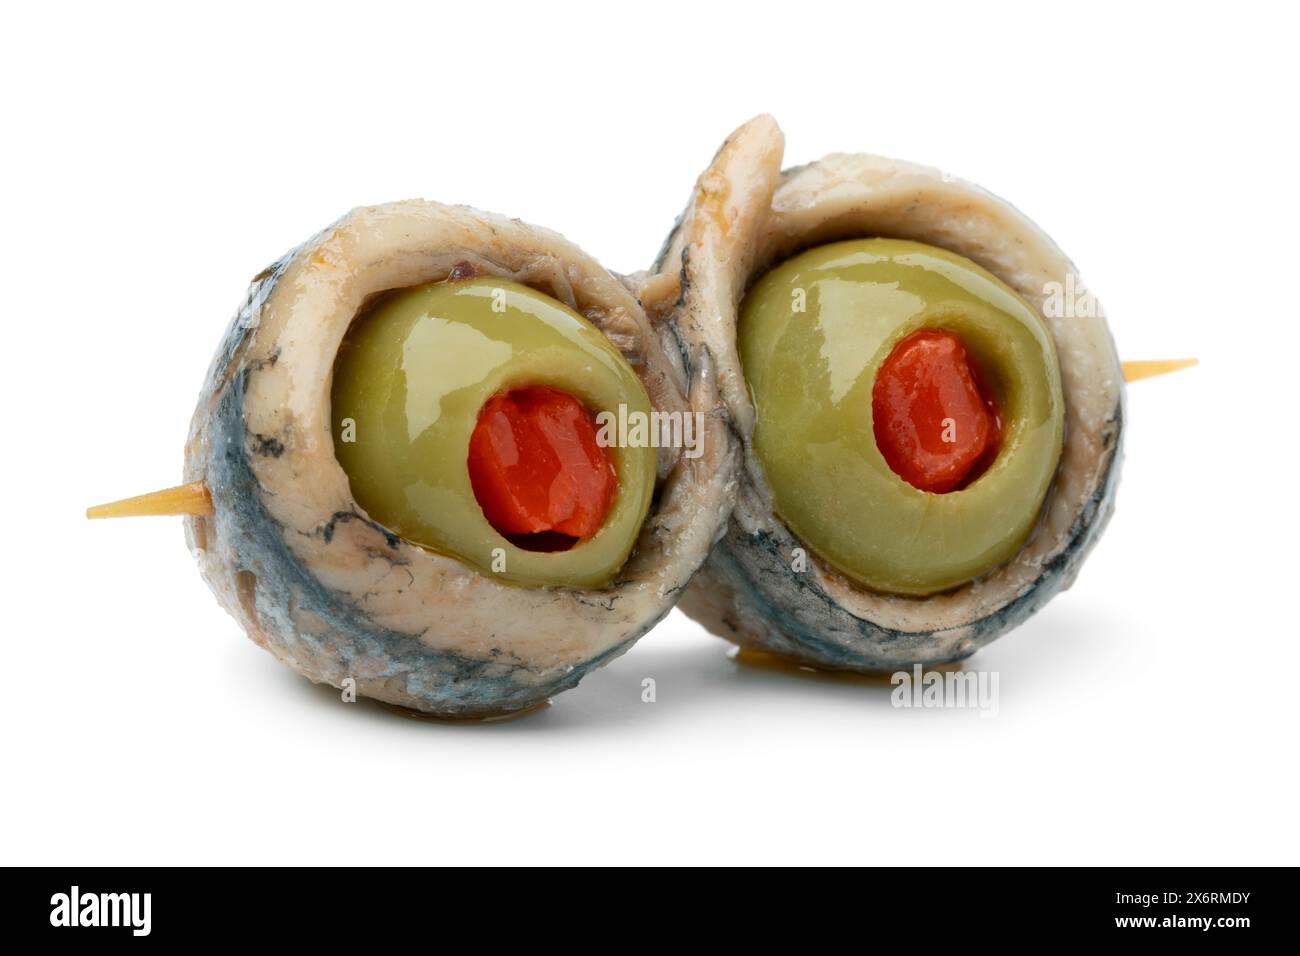 Spanish tapas, stick with a pair of green olives stuffed with red pepper and anchovy isolated on white background close up Stock Photo